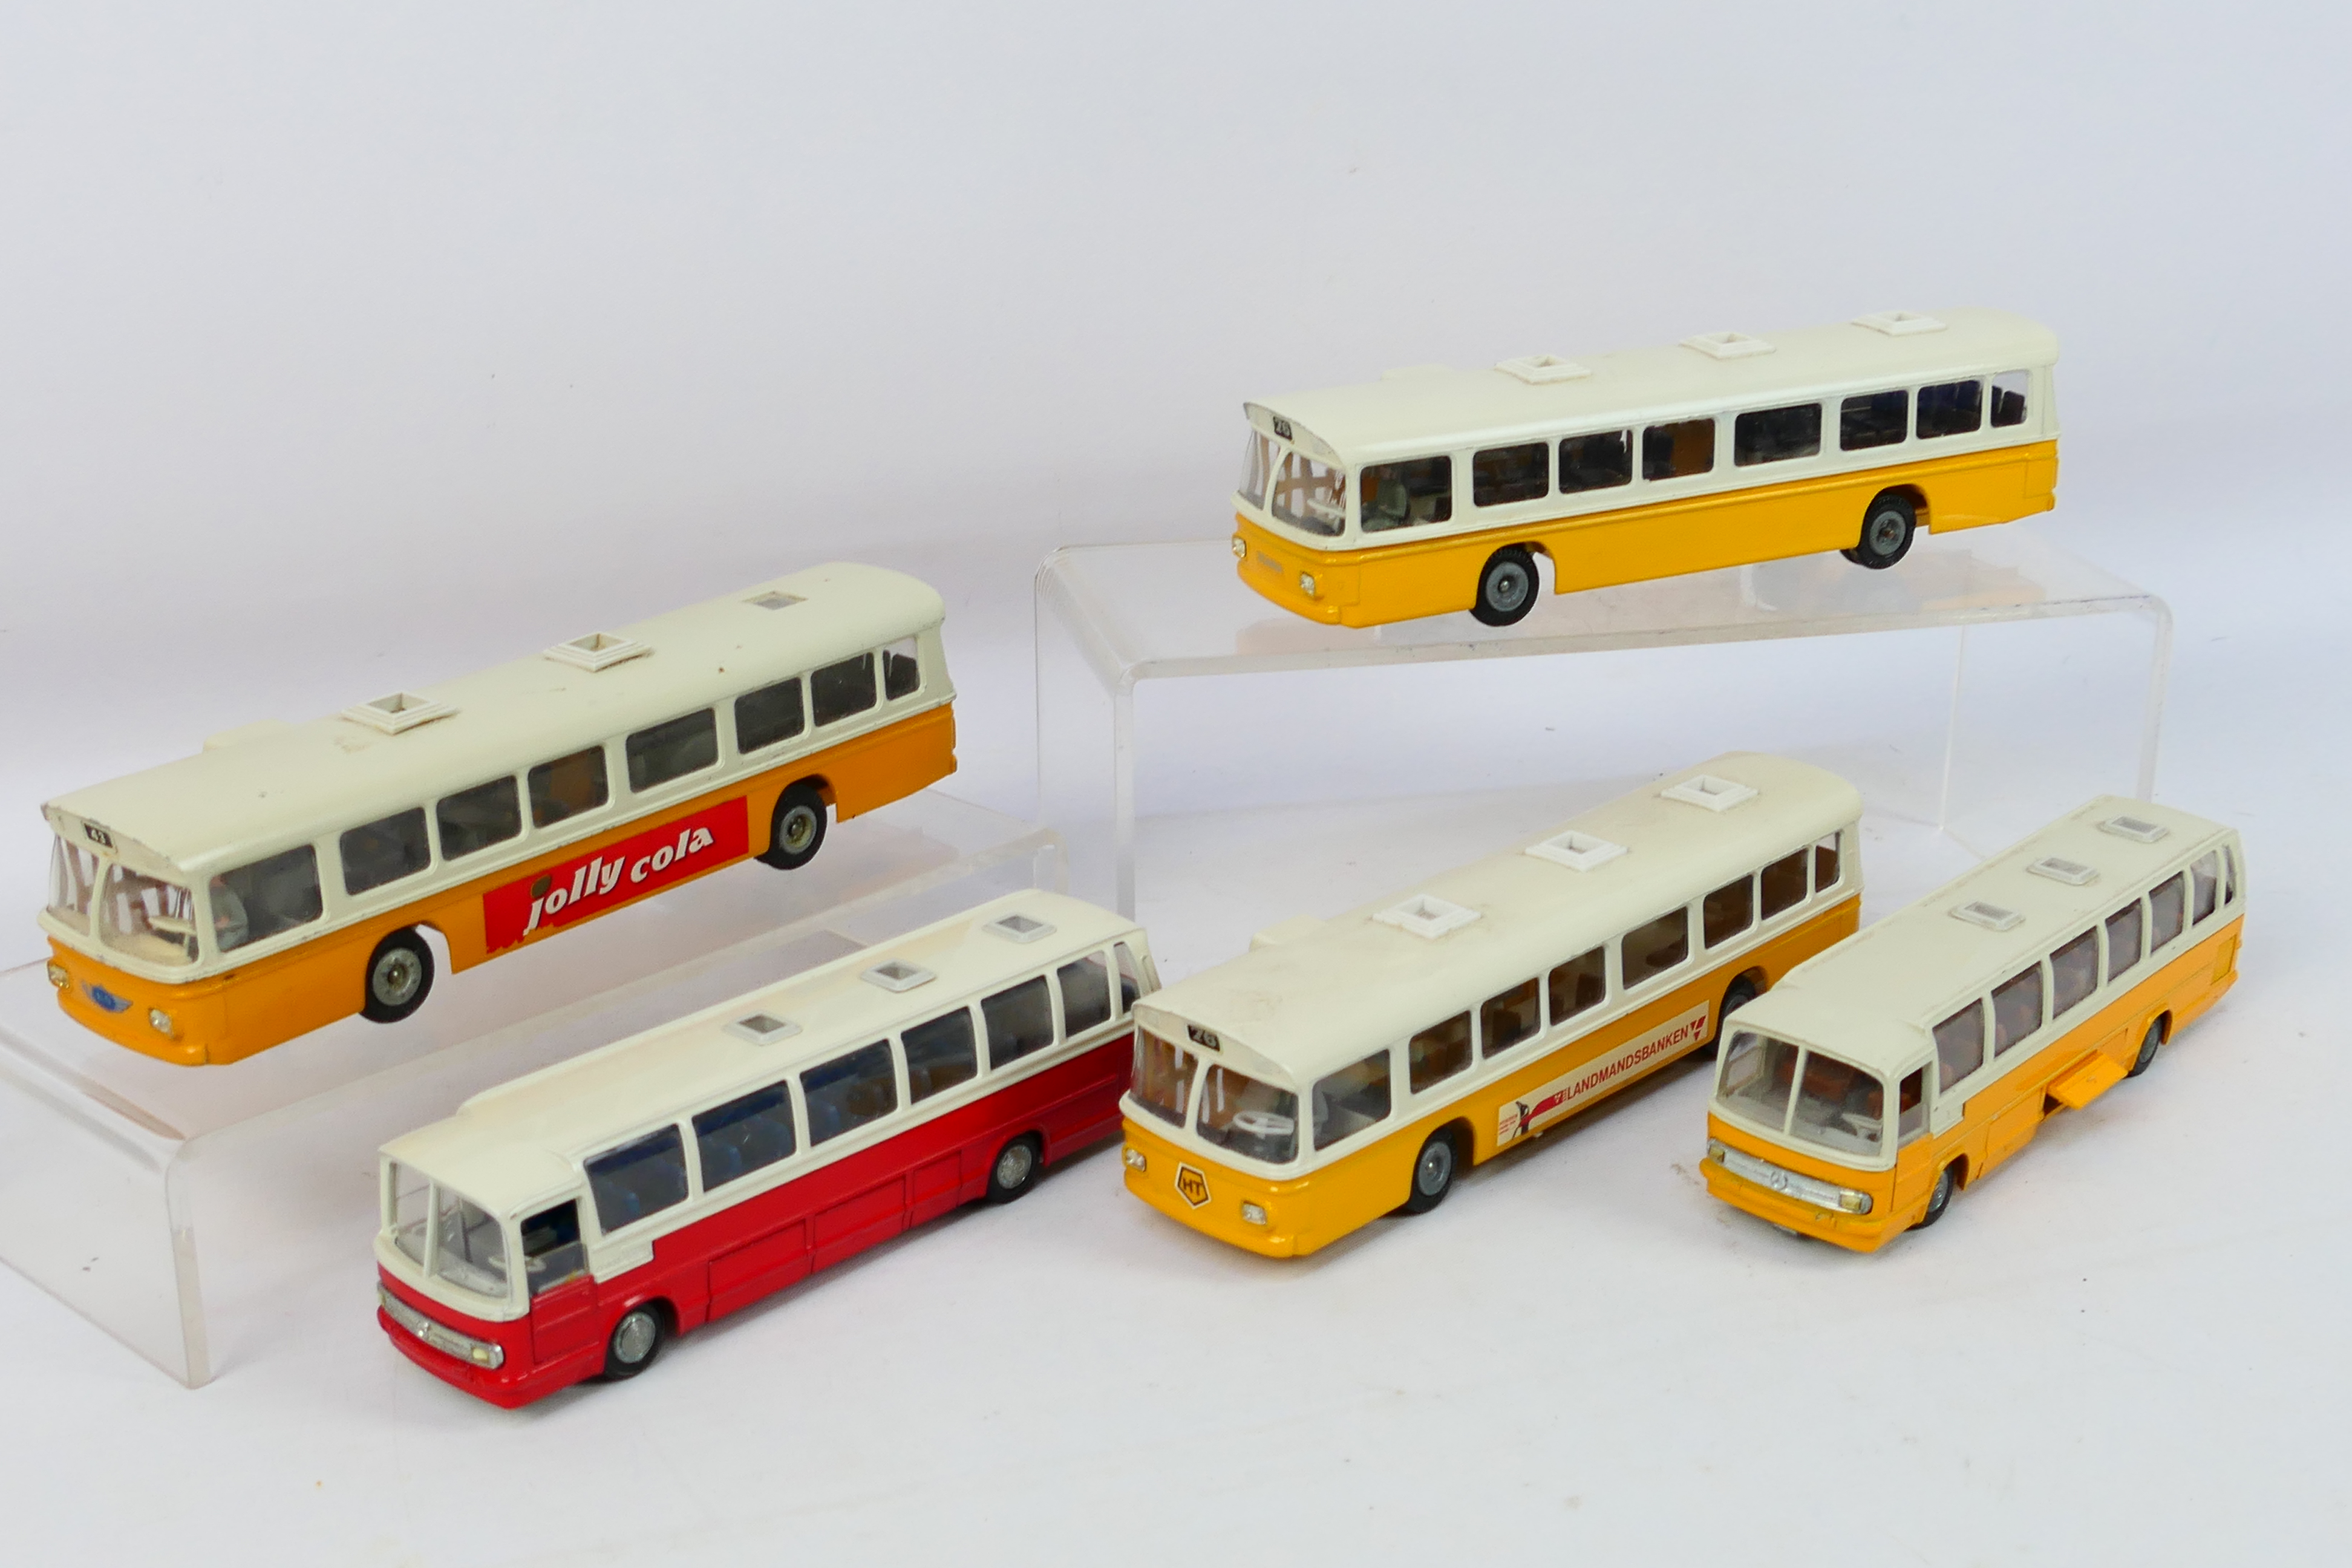 Tekno - Five unboxed diecast 1:50 scale model buses from Tekno.